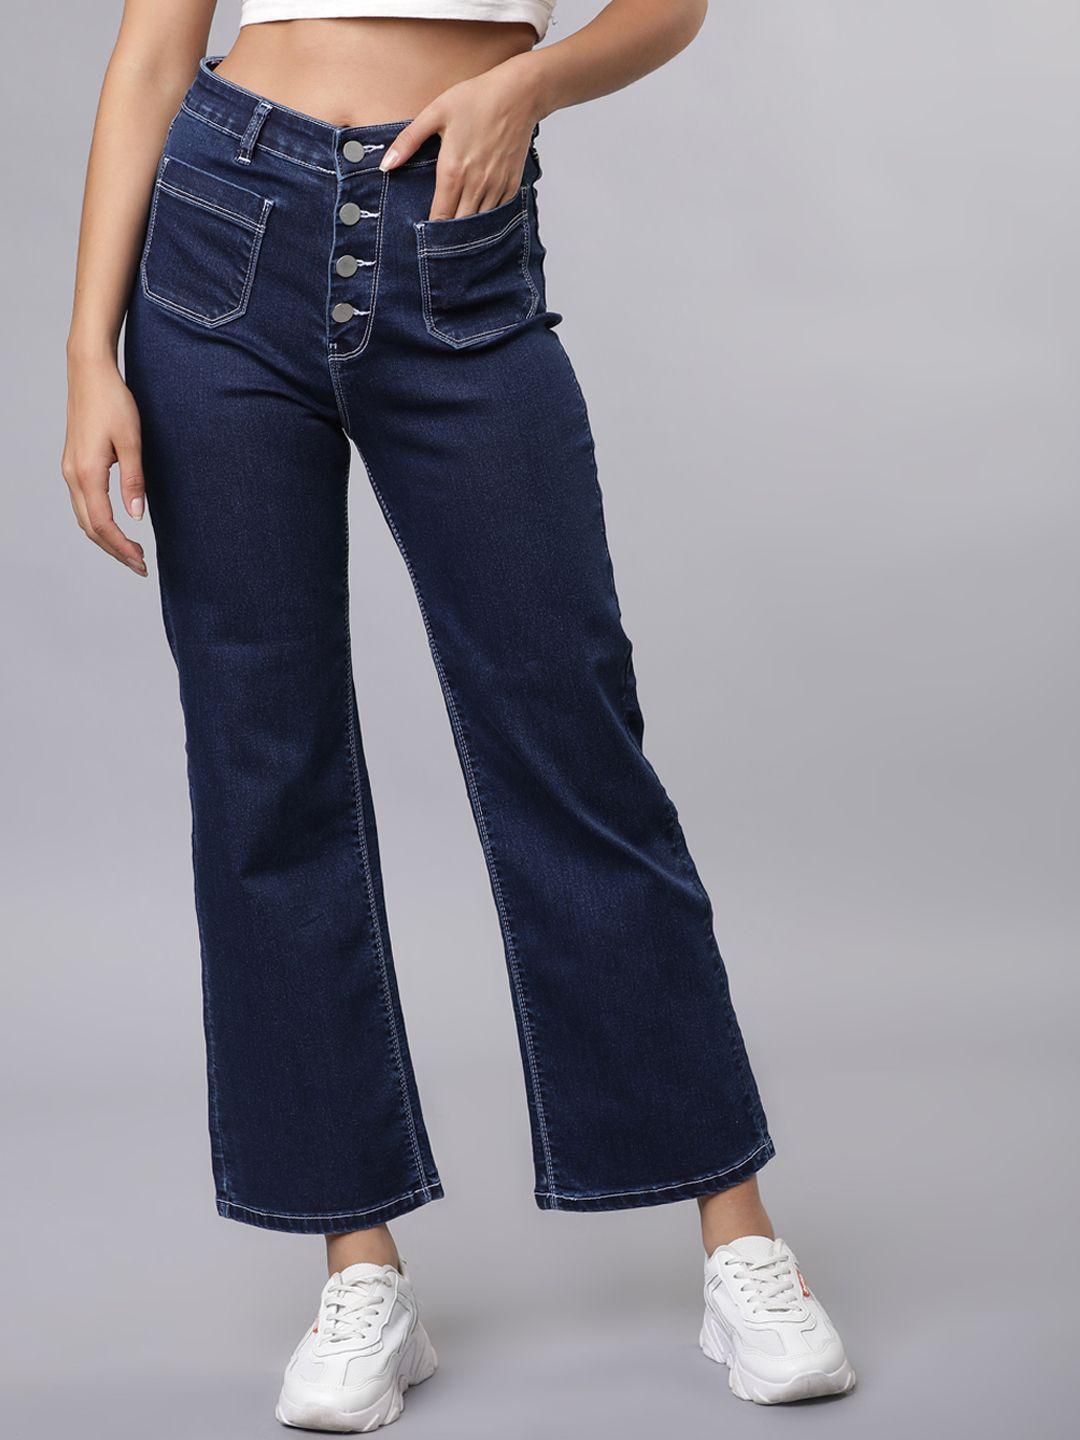 tokyo-talkies-women-blue-relaxed-fit-high-rise-clean-look-stretchable-jeans